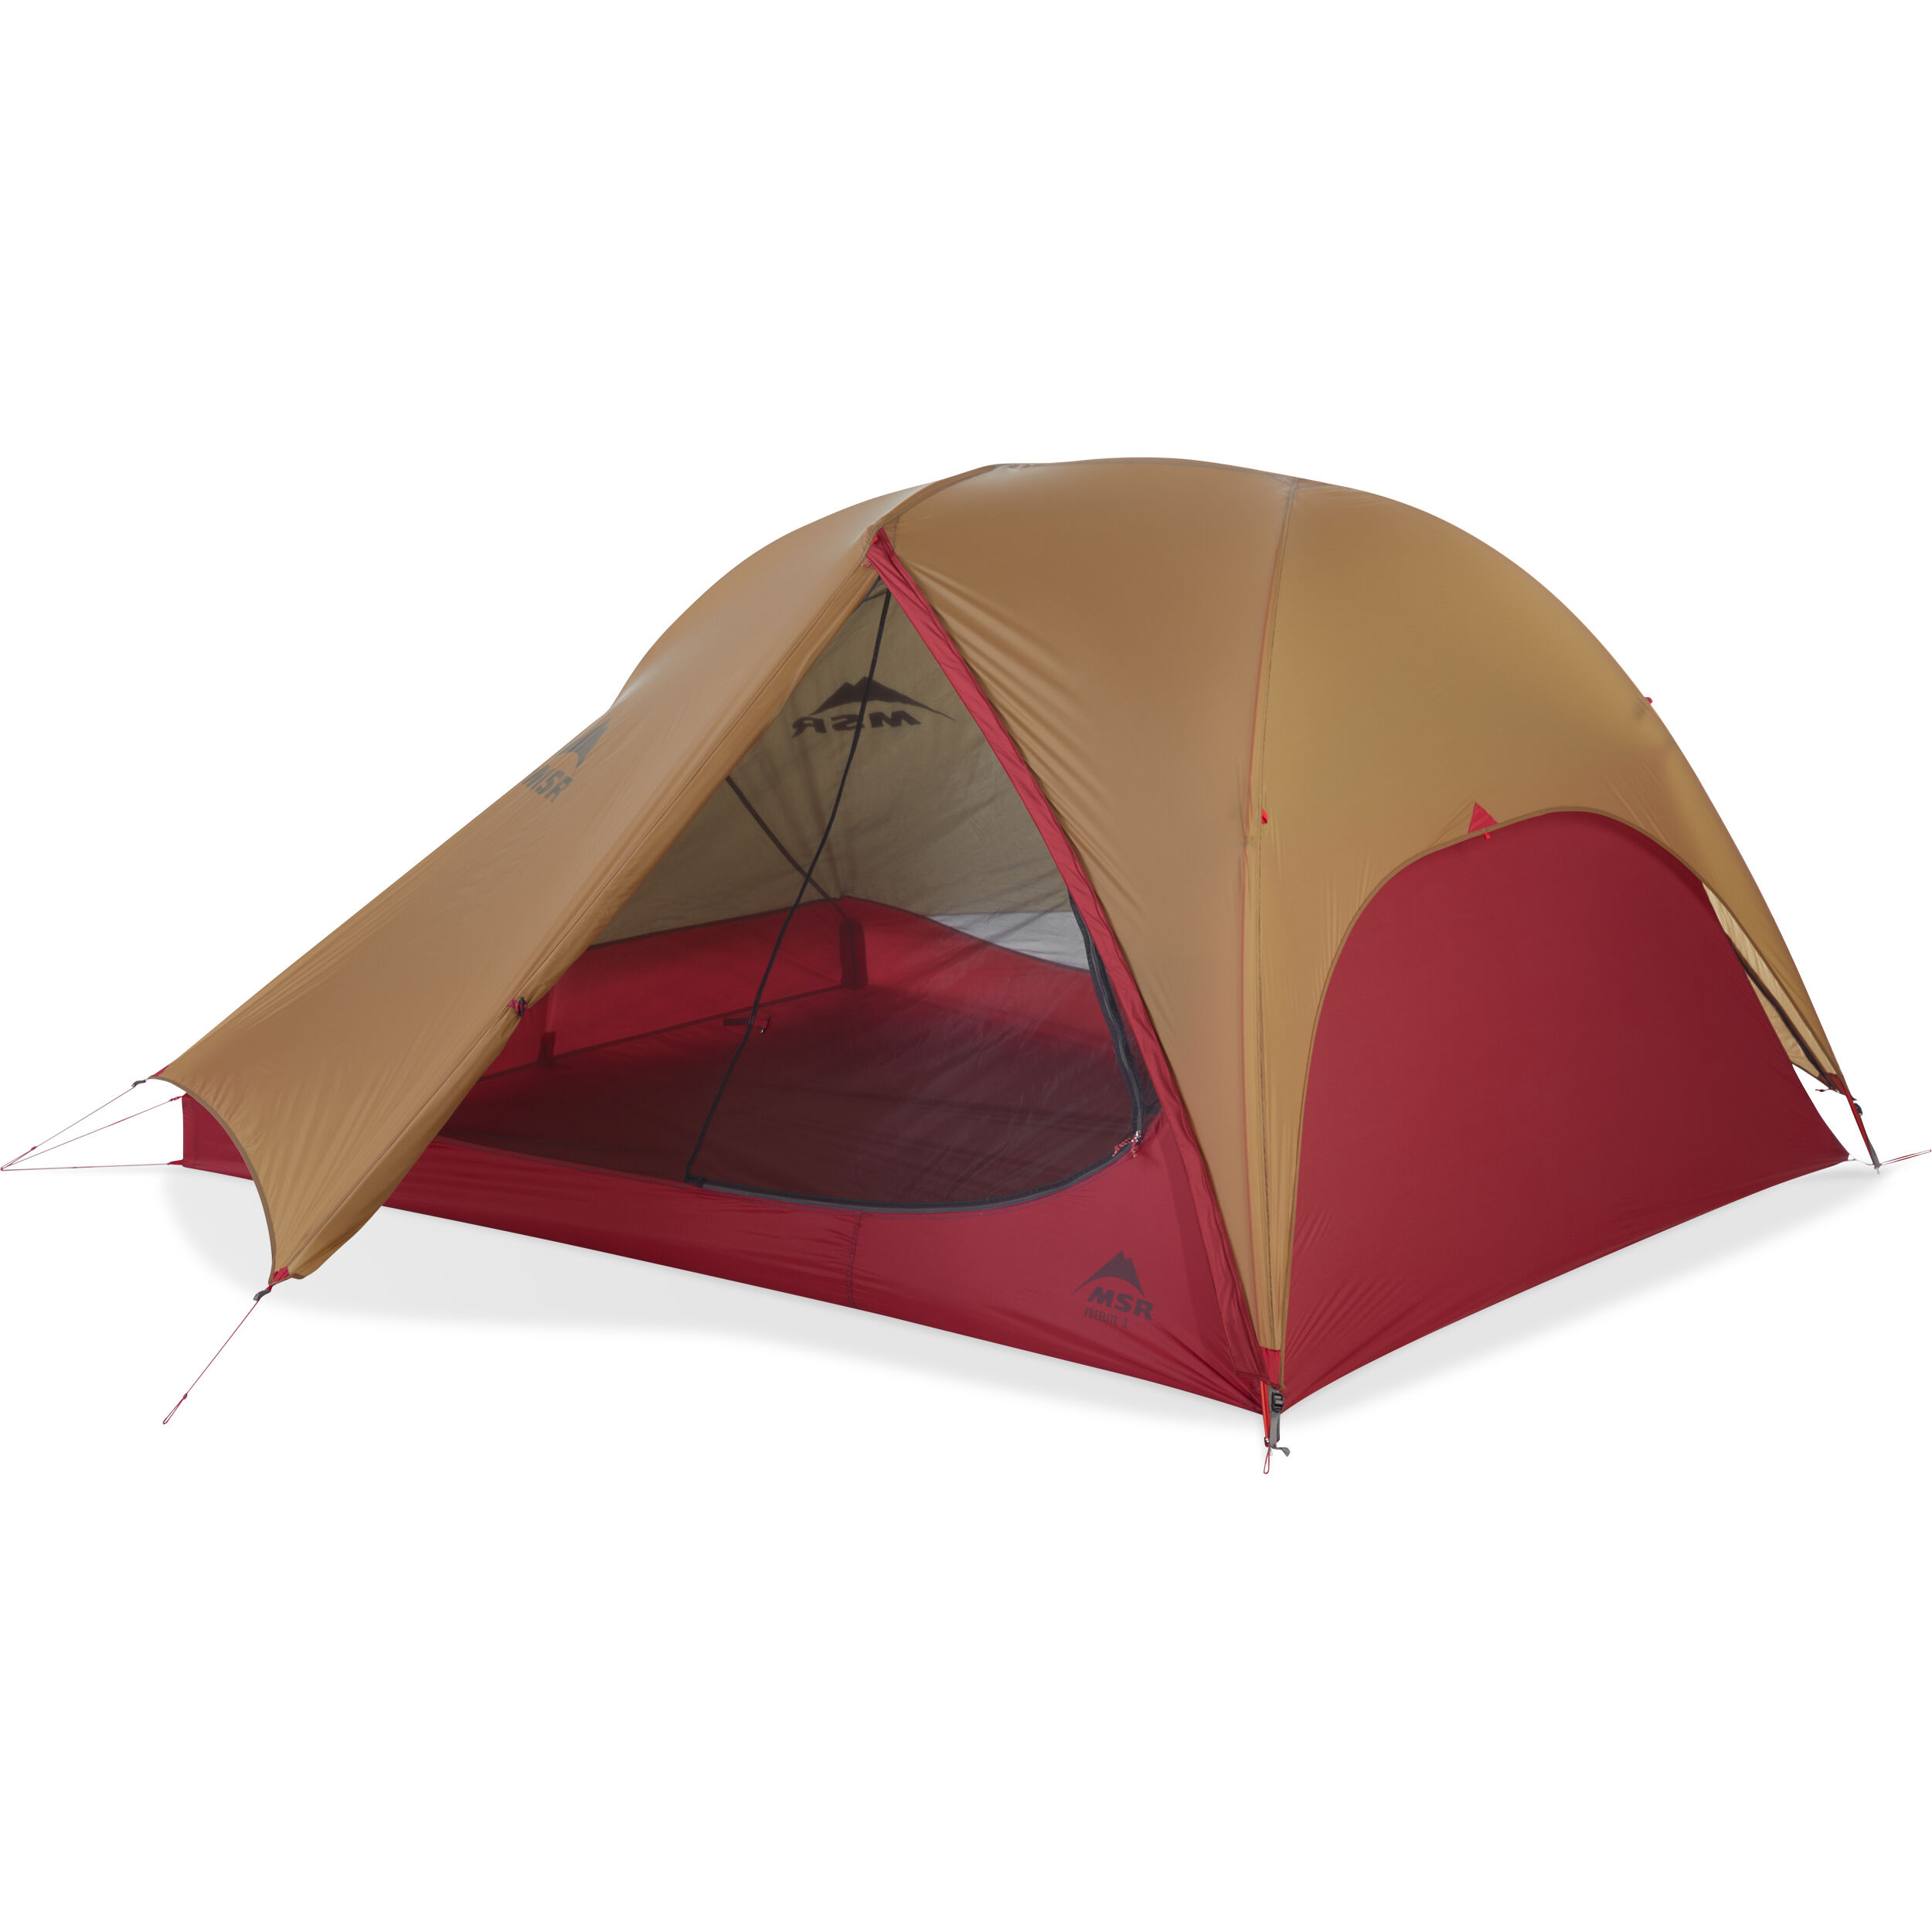 Backpacking Tents | Ultralight 3 and 4 Season Tents | MSR®